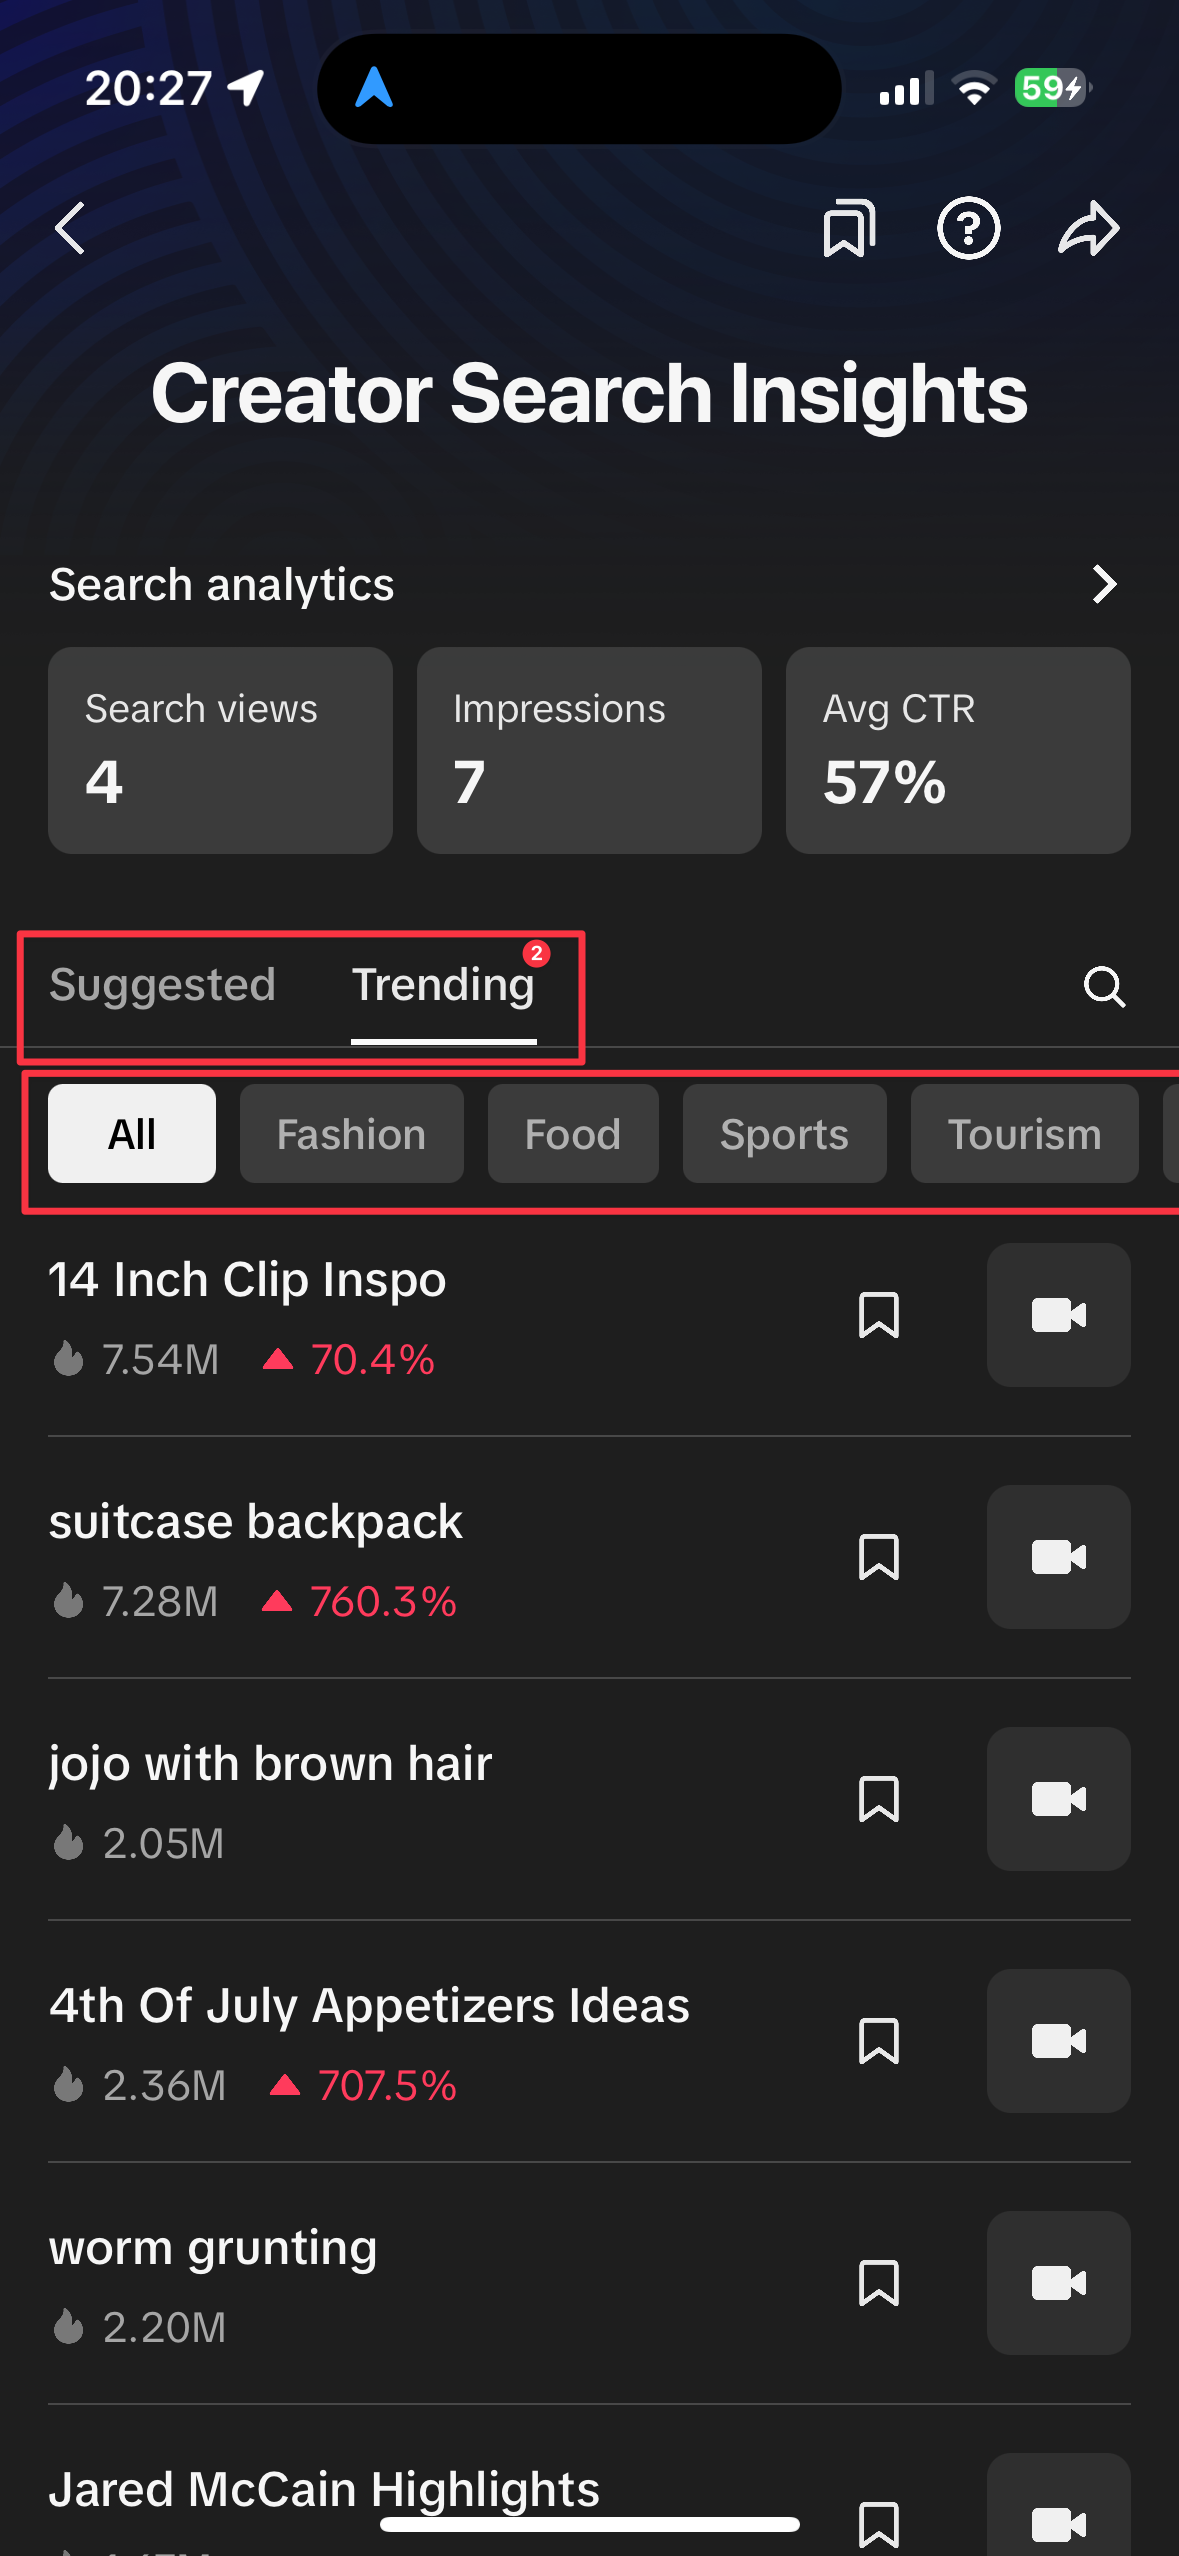 How to Get Your Next Idea Using TikTok's Creator Search Insights